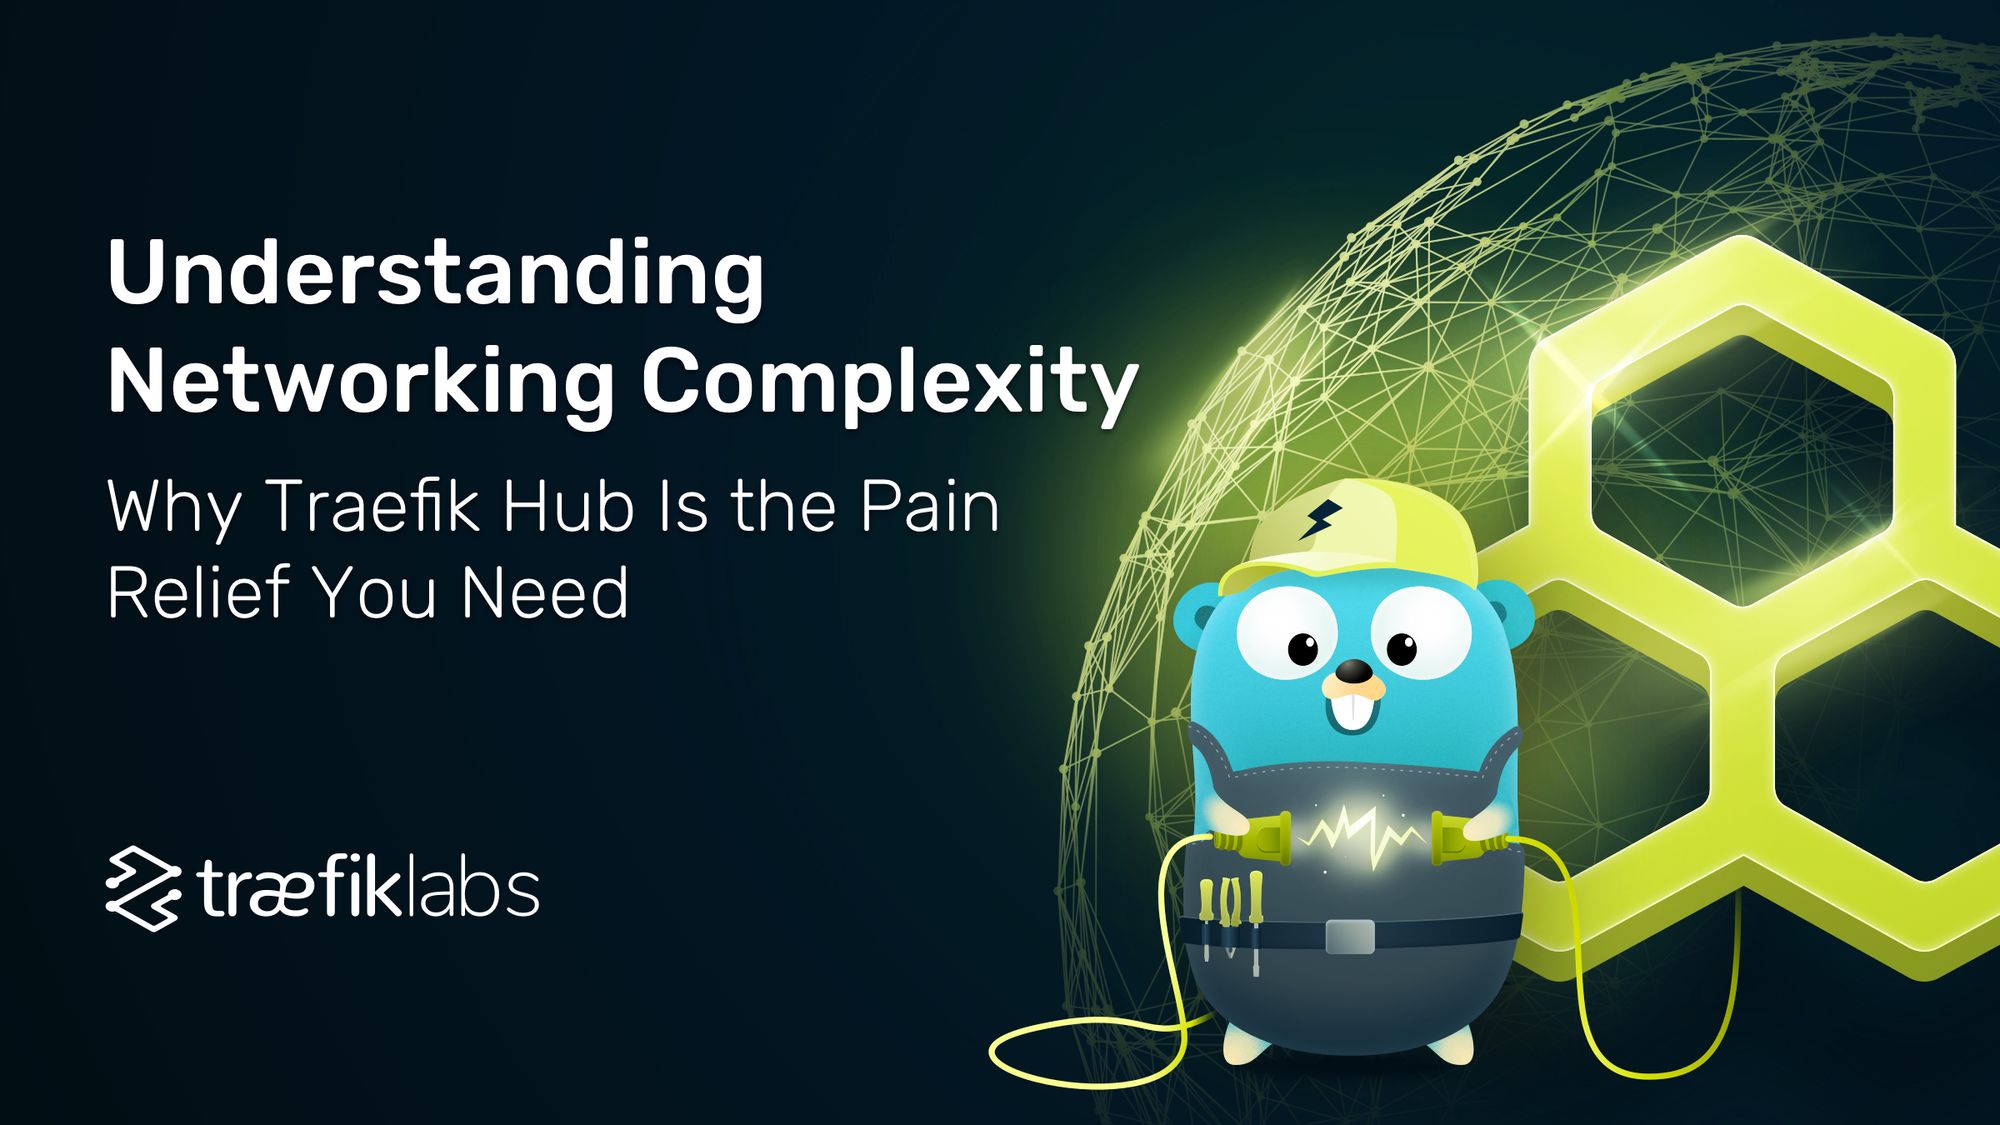 networking complexity and why traefik hub is the pain relief you need